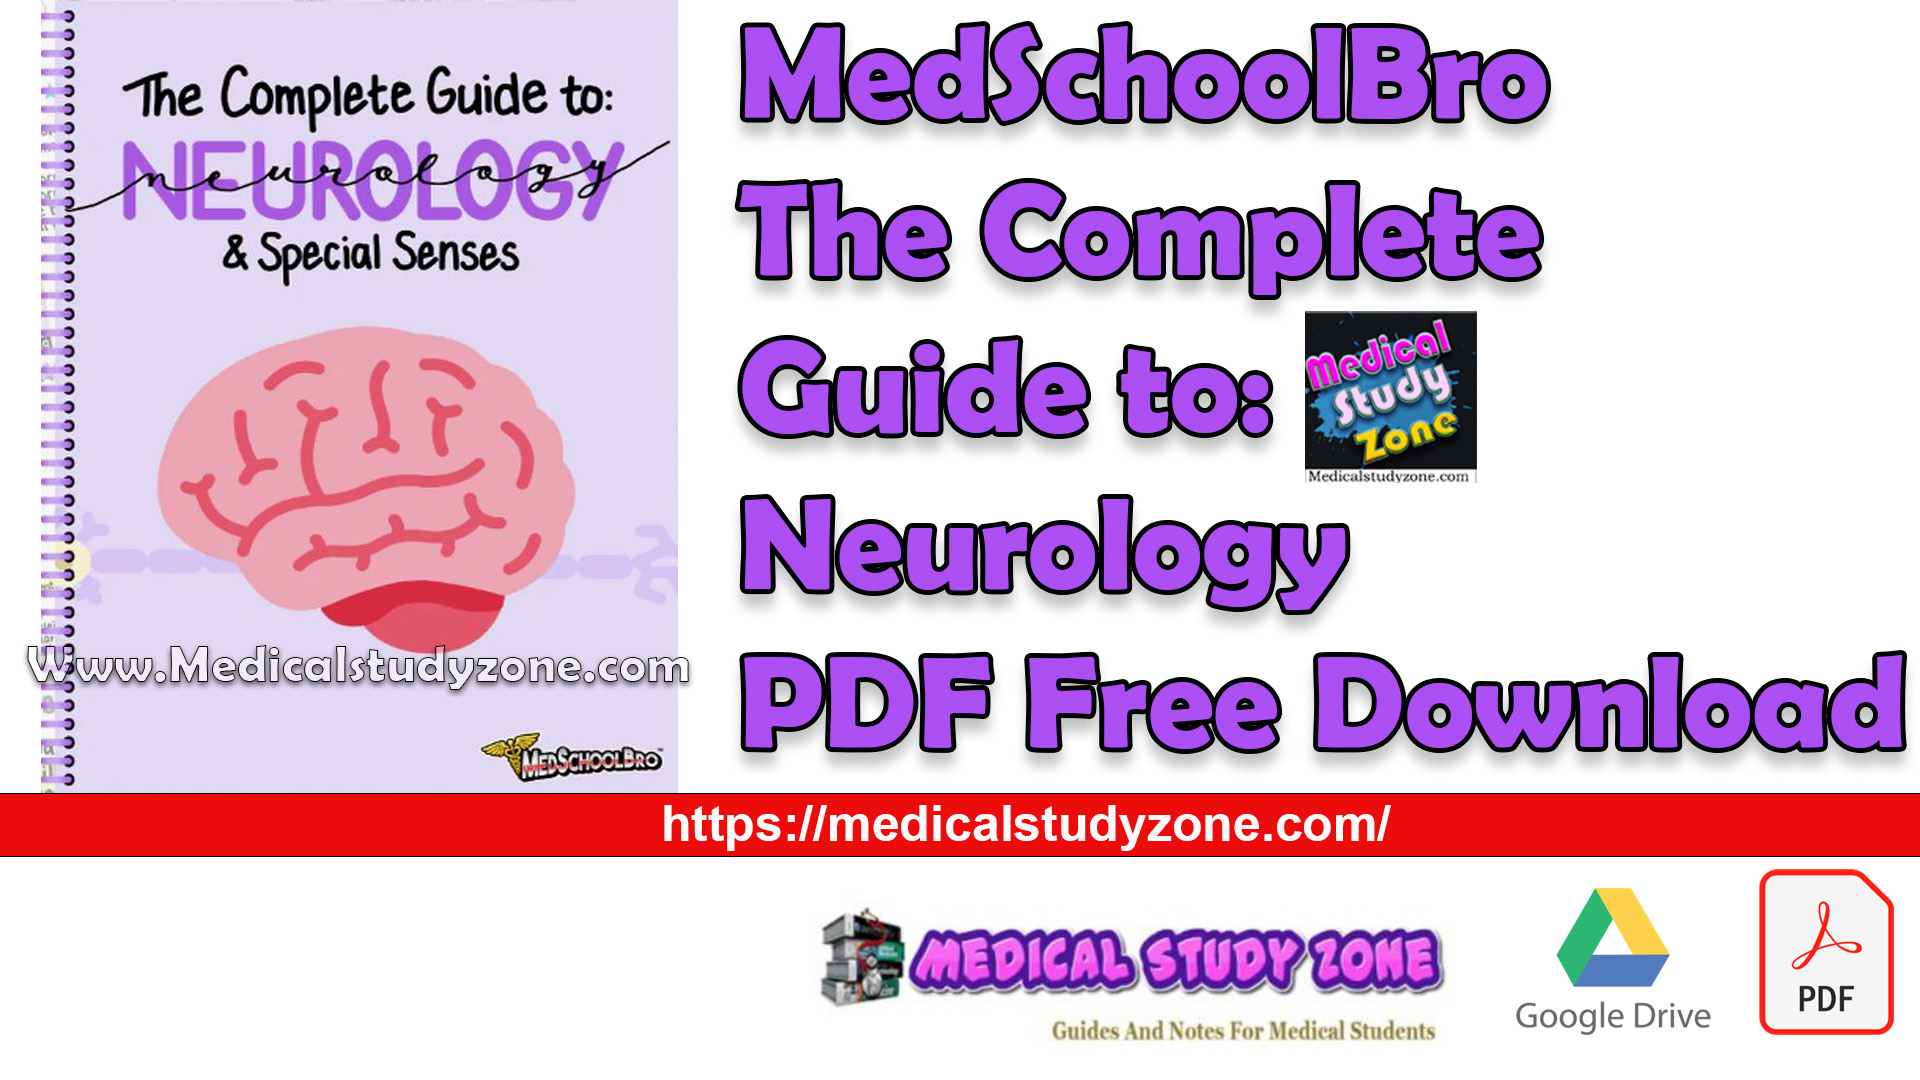 MedSchoolBro The Complete Guide to: Neurology PDF Free Download